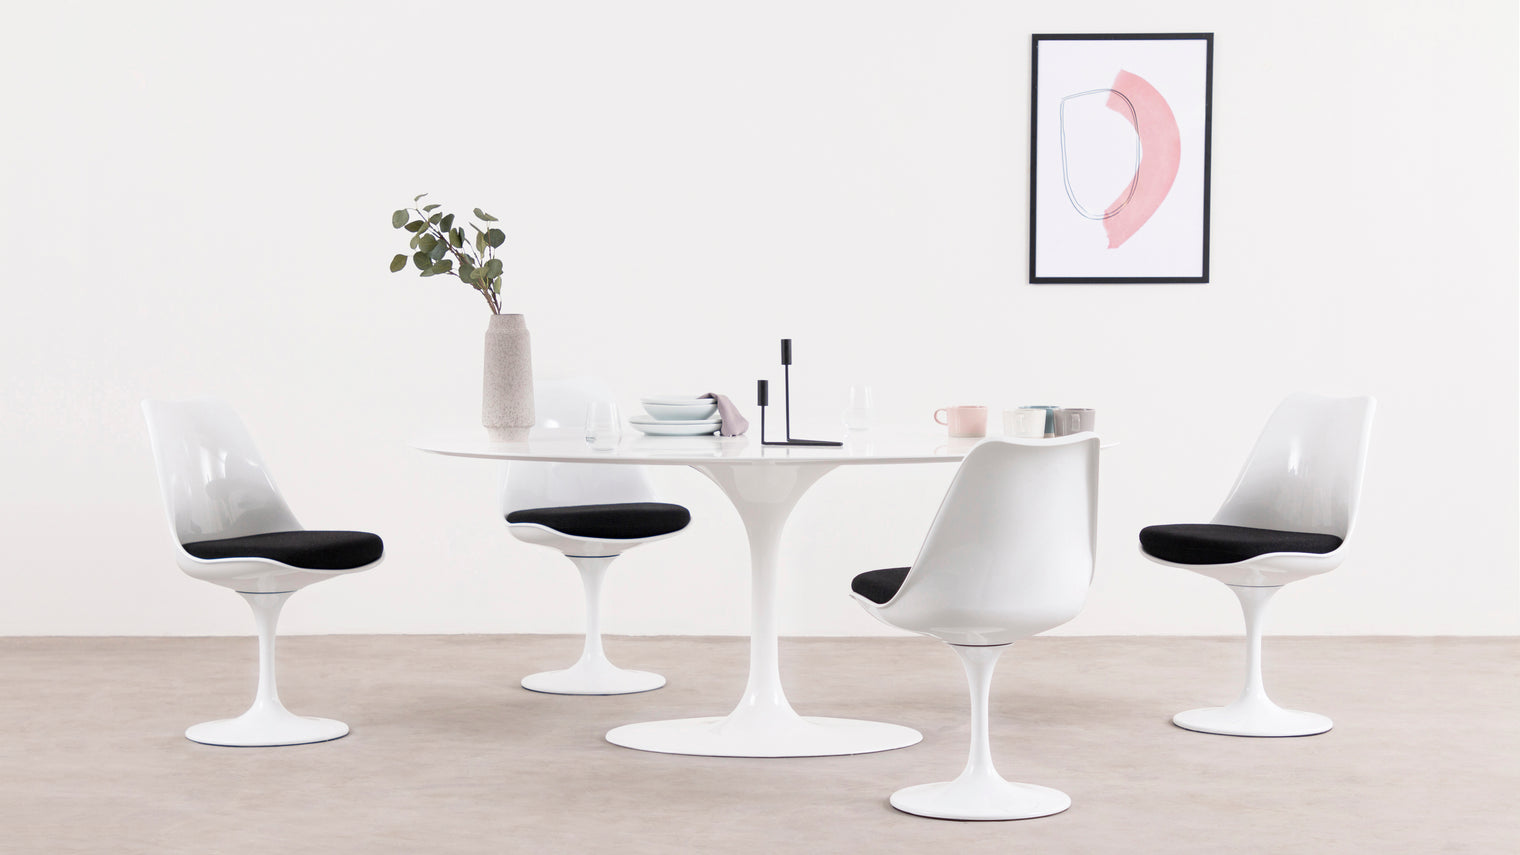 Comfort revolutionized|This stunningly sophisticated chair is the perfect addition to any stylish space. It’s incredibly comfortable, thanks to its curved shape and padded cushion, making it ideal for prolonged sitting. A great alternative to the traditional office chair, the Tulip Style Chair includes a built-in swivel feature, adding to its versatility.
